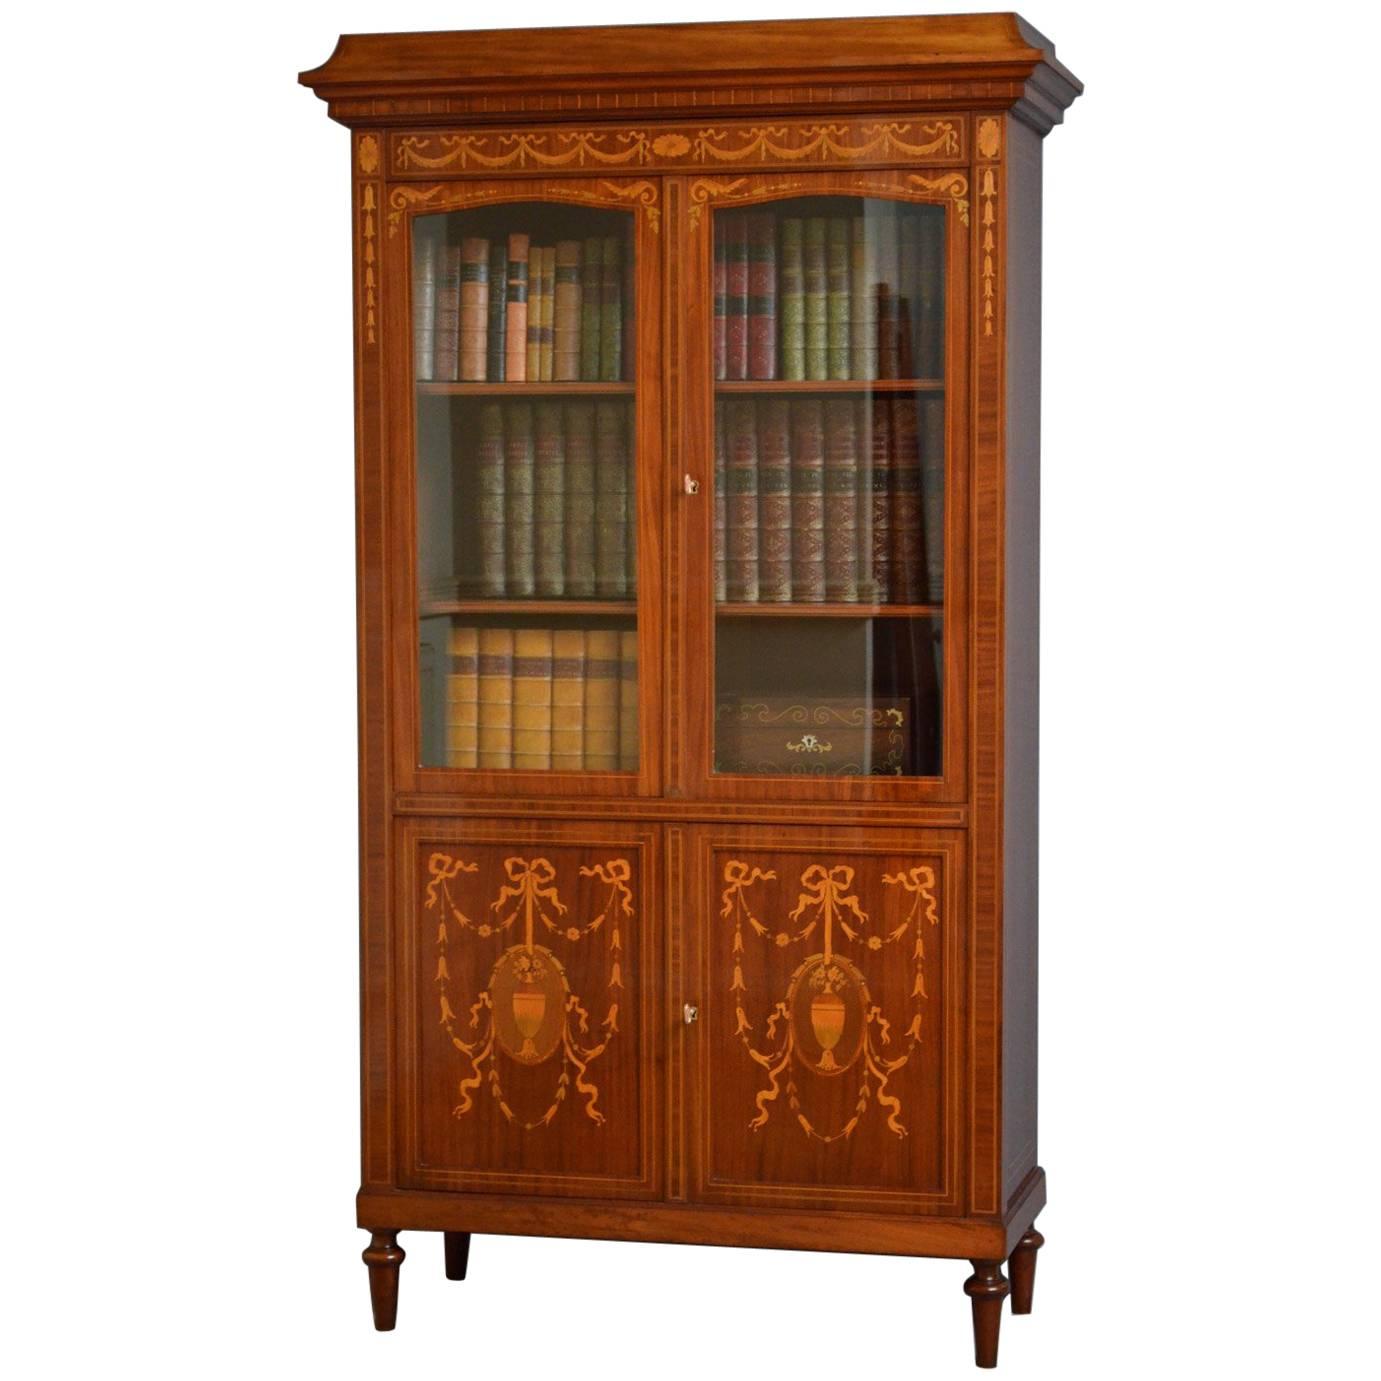 Turn of the Century French Bookcase in Mahogany